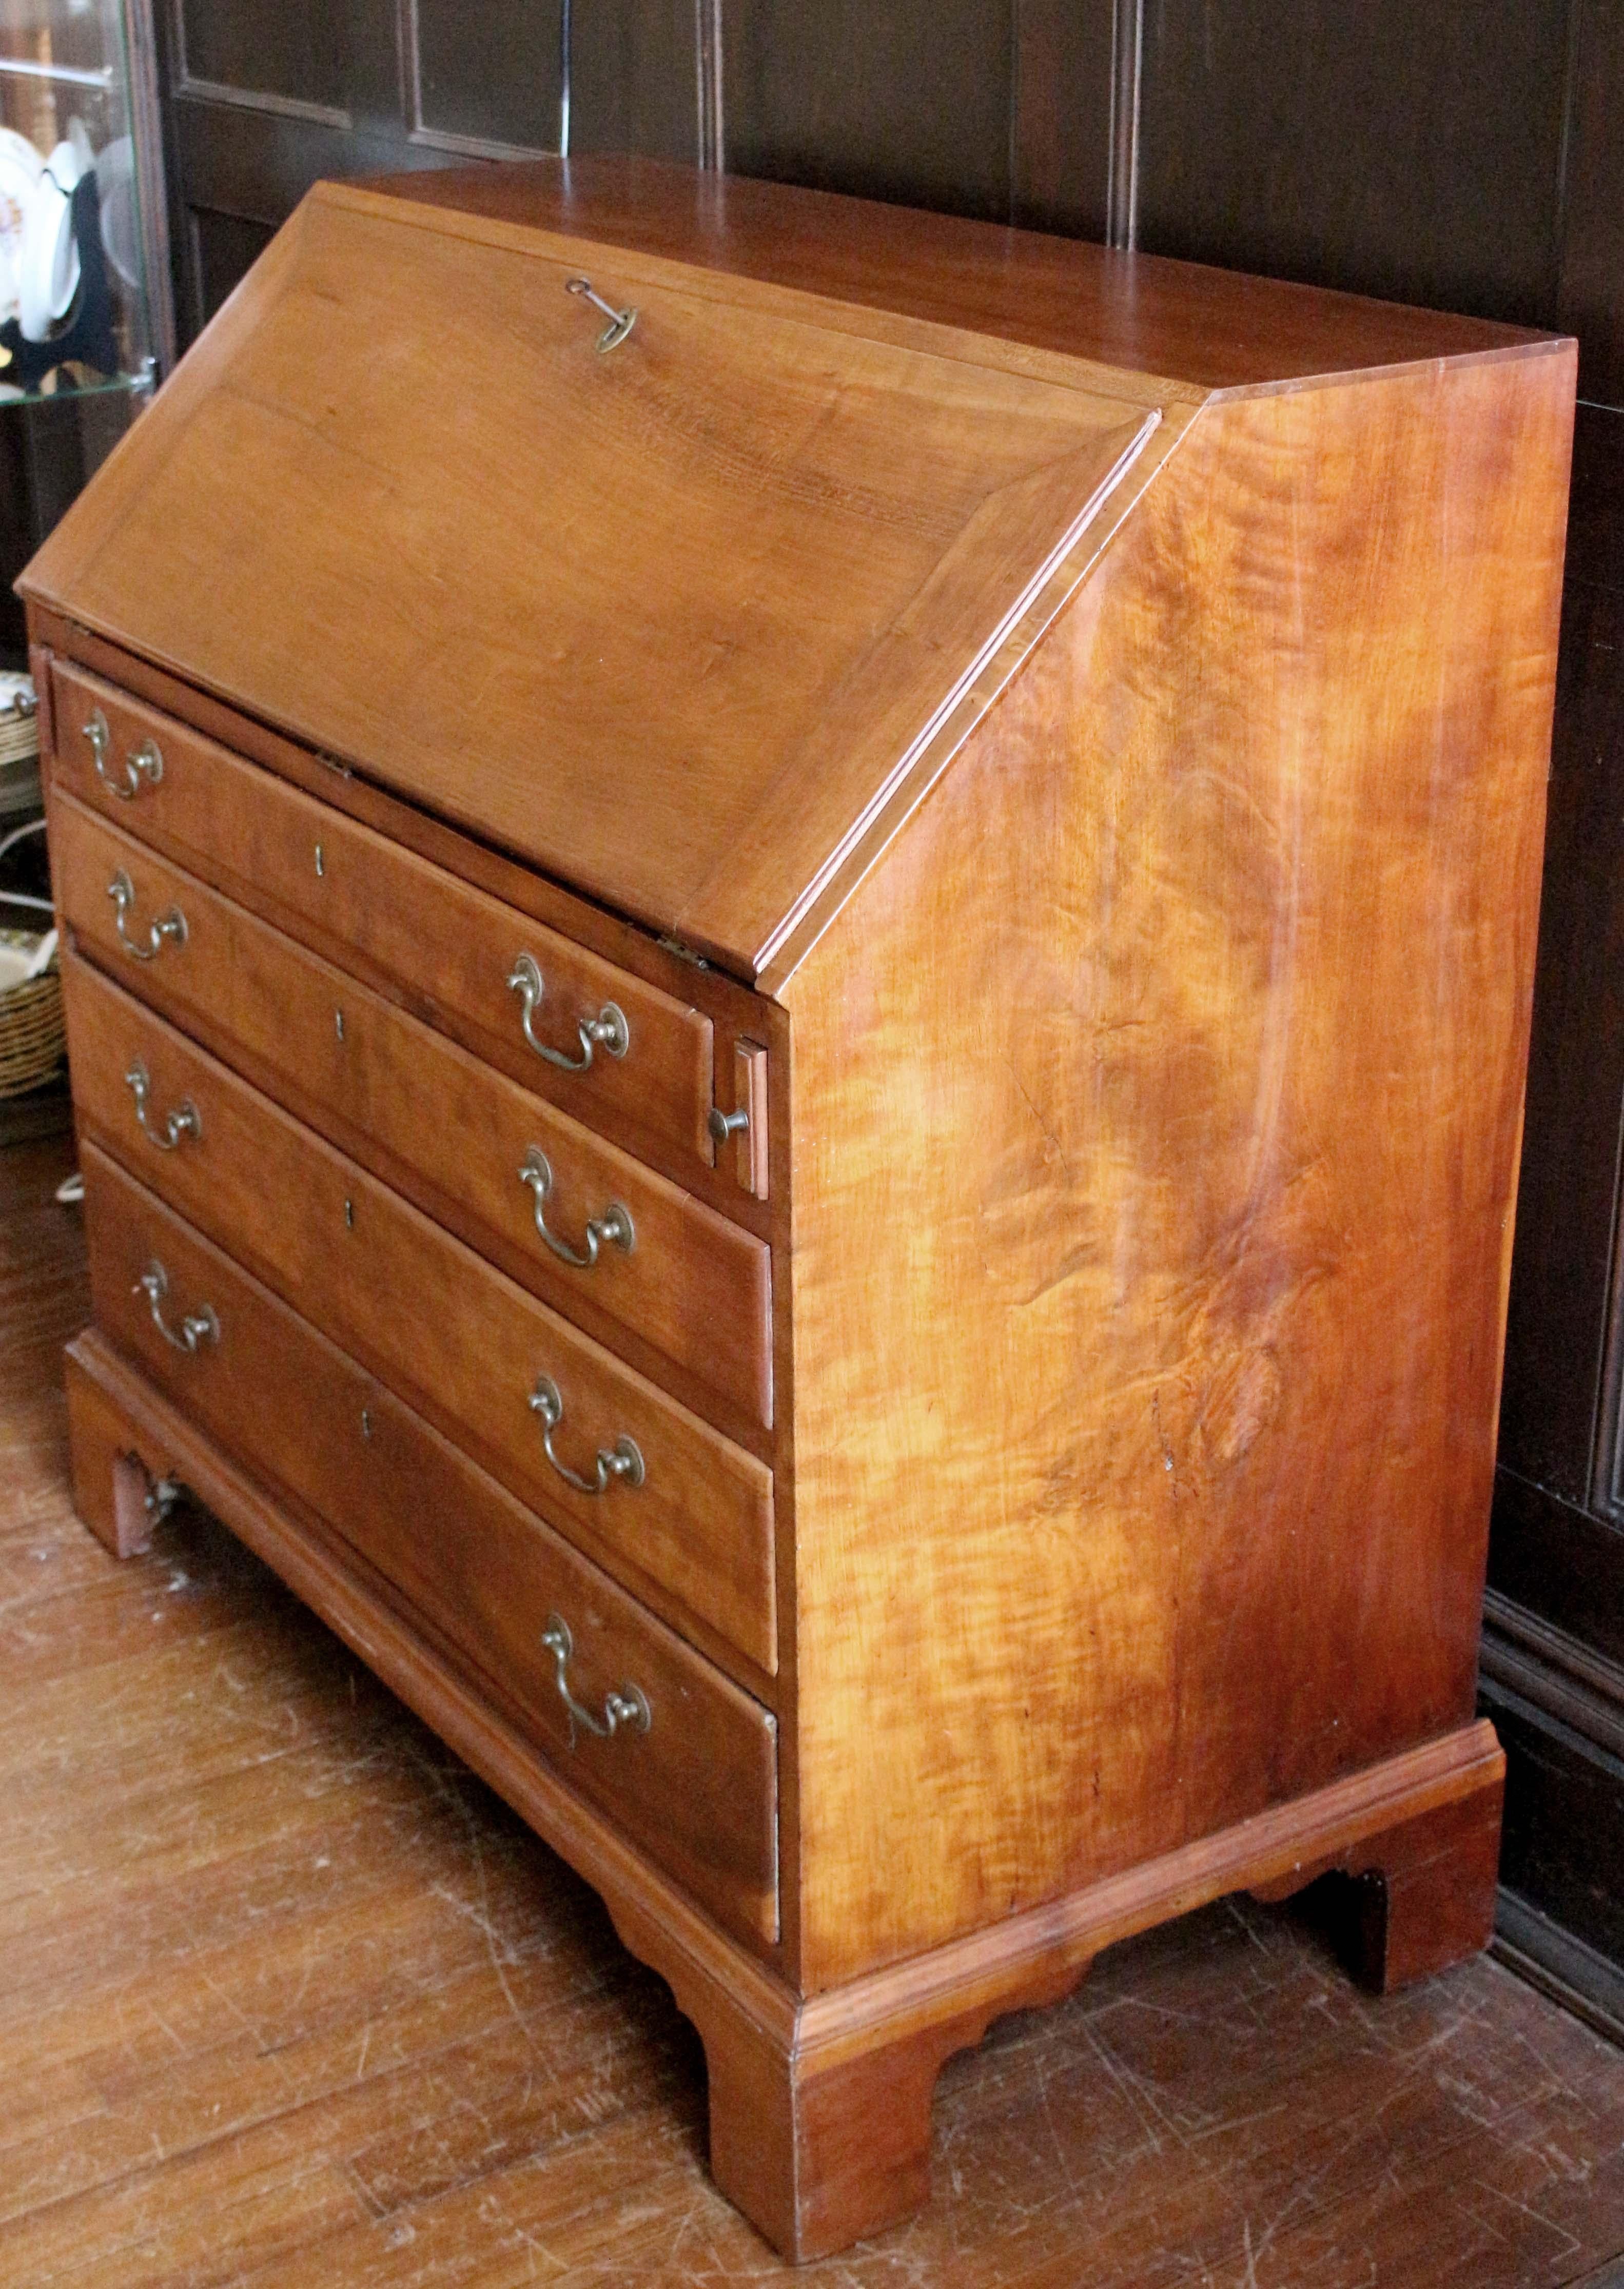 Circa 1780-1810 American Slant-Front Desk In Good Condition For Sale In Chapel Hill, NC